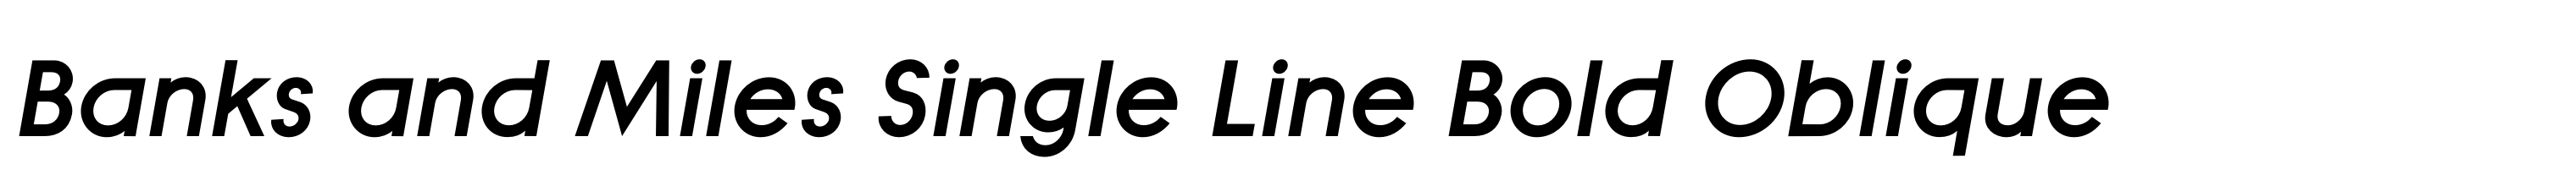 Banks and Miles Single Line Bold Oblique